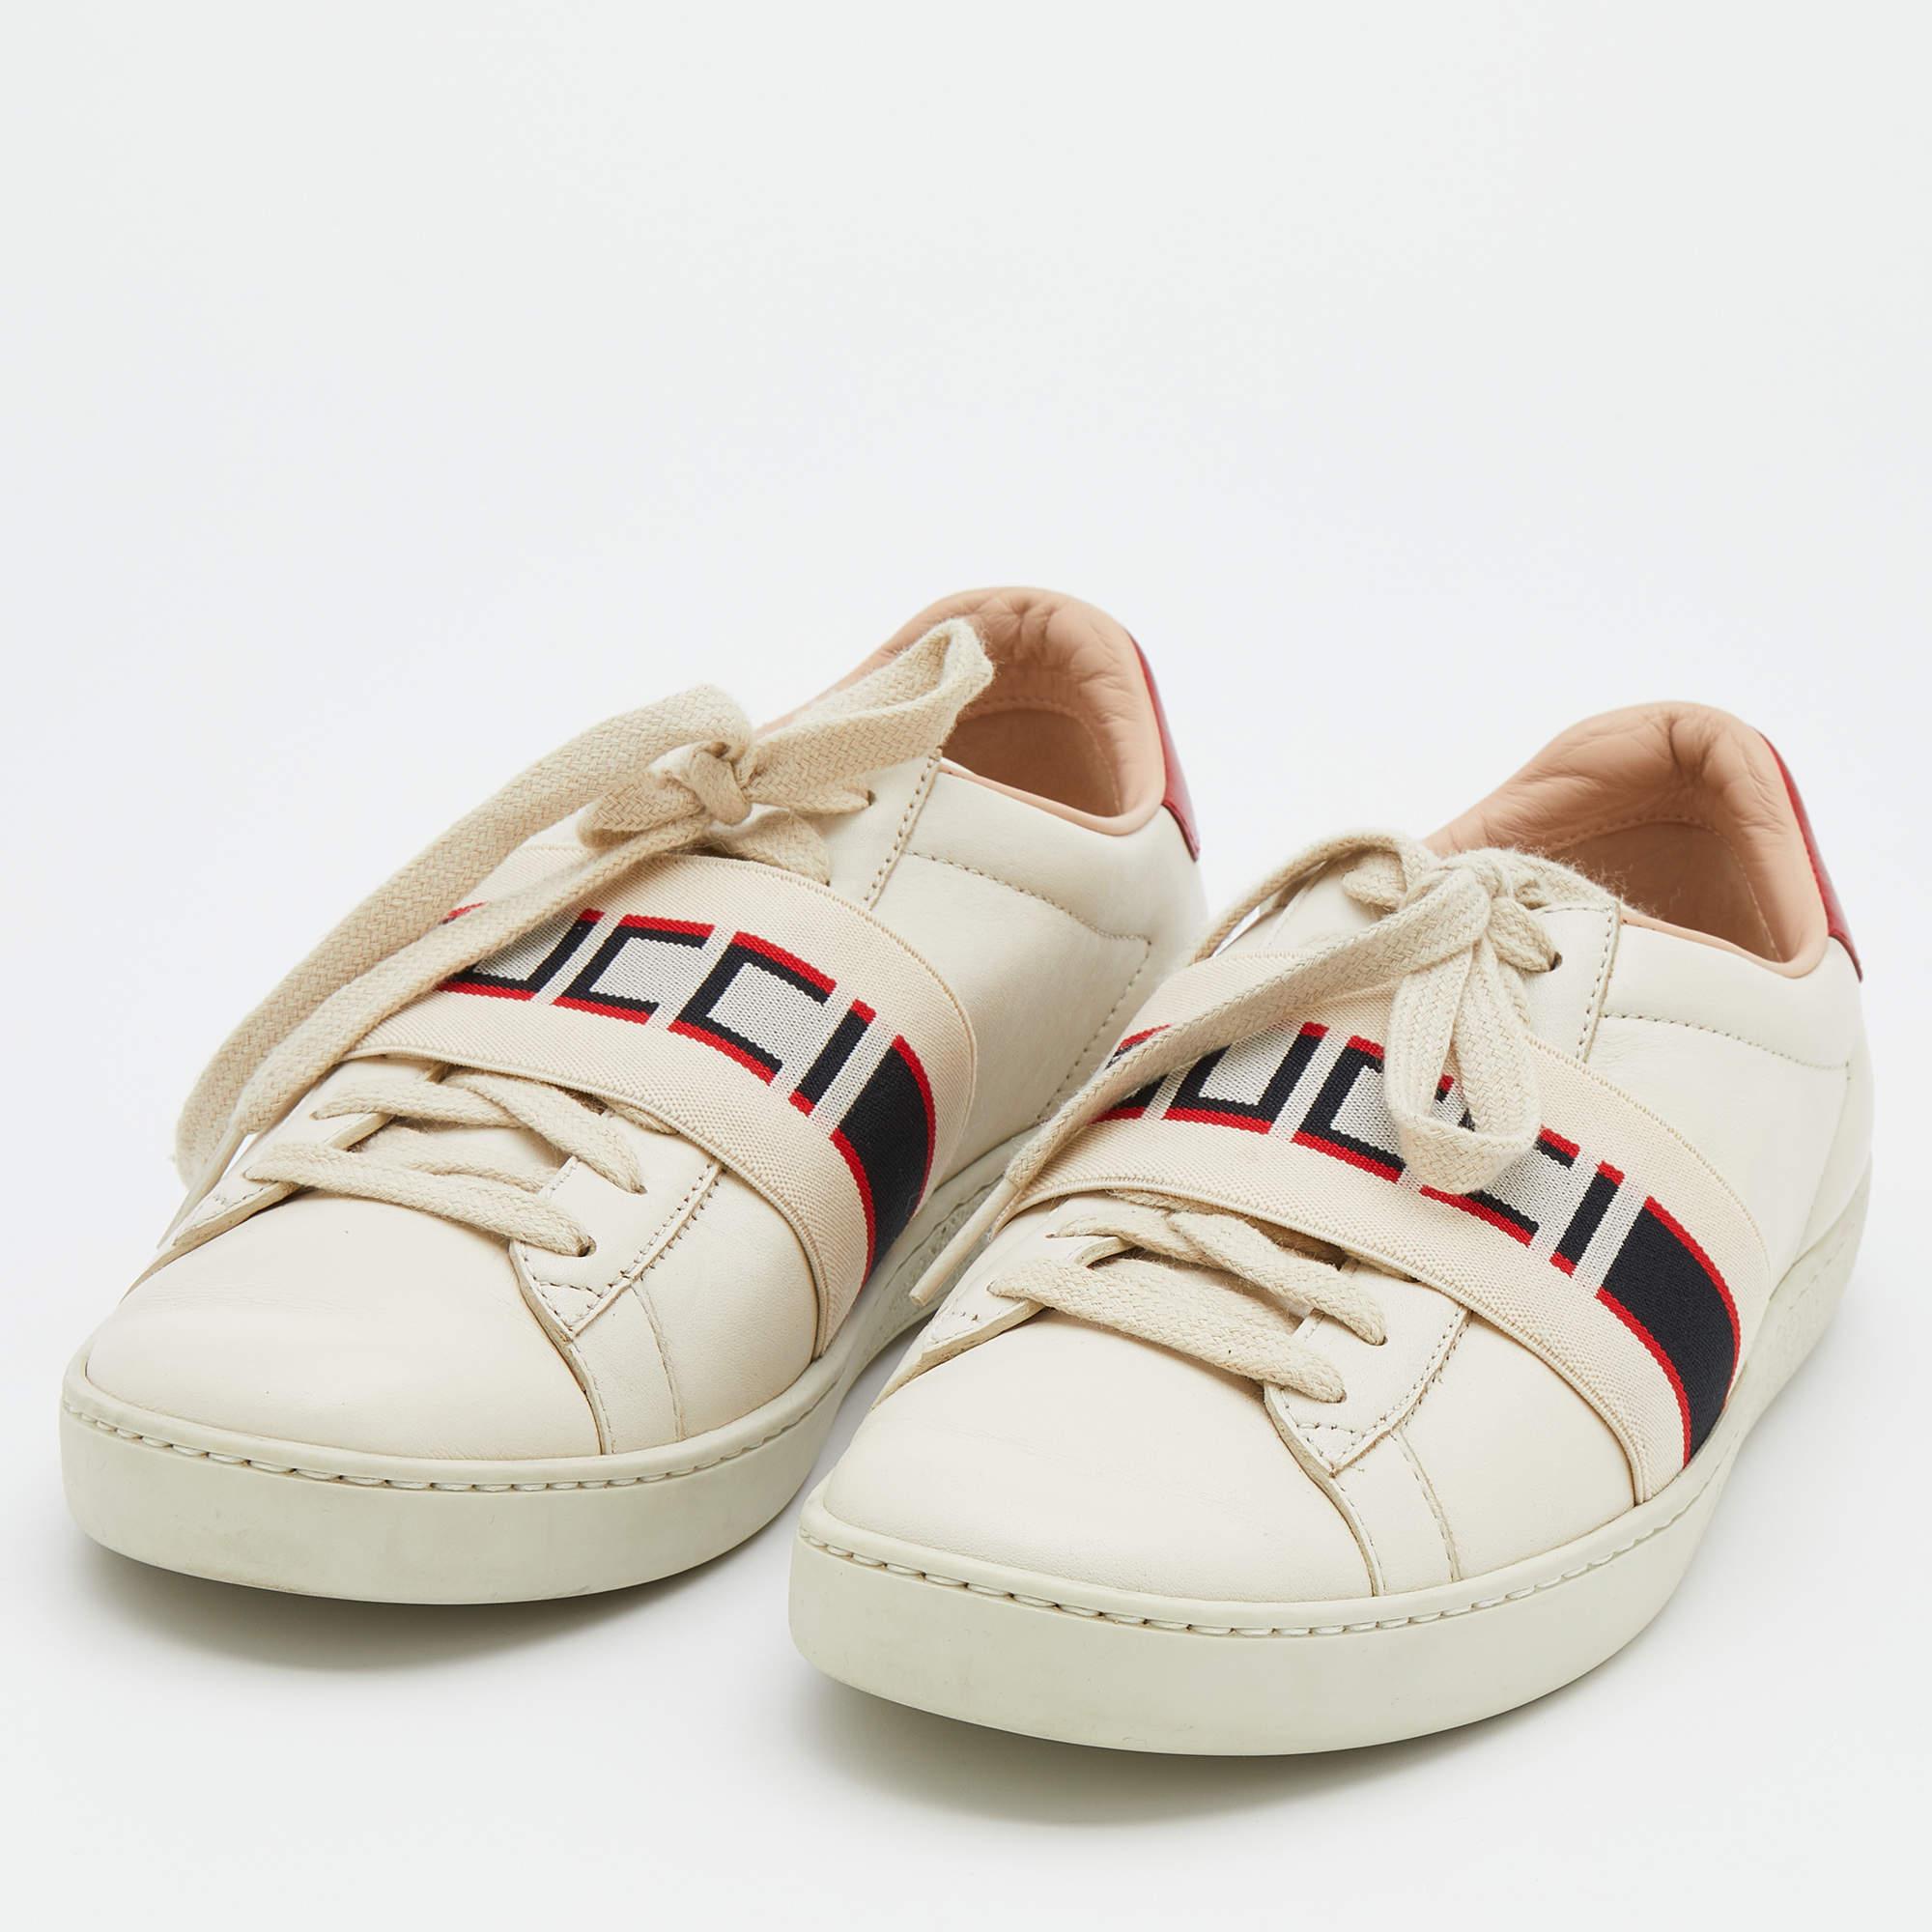 Women's Gucci White/Red Leather Elastic Band Ace Low Top Sneakers Size 37